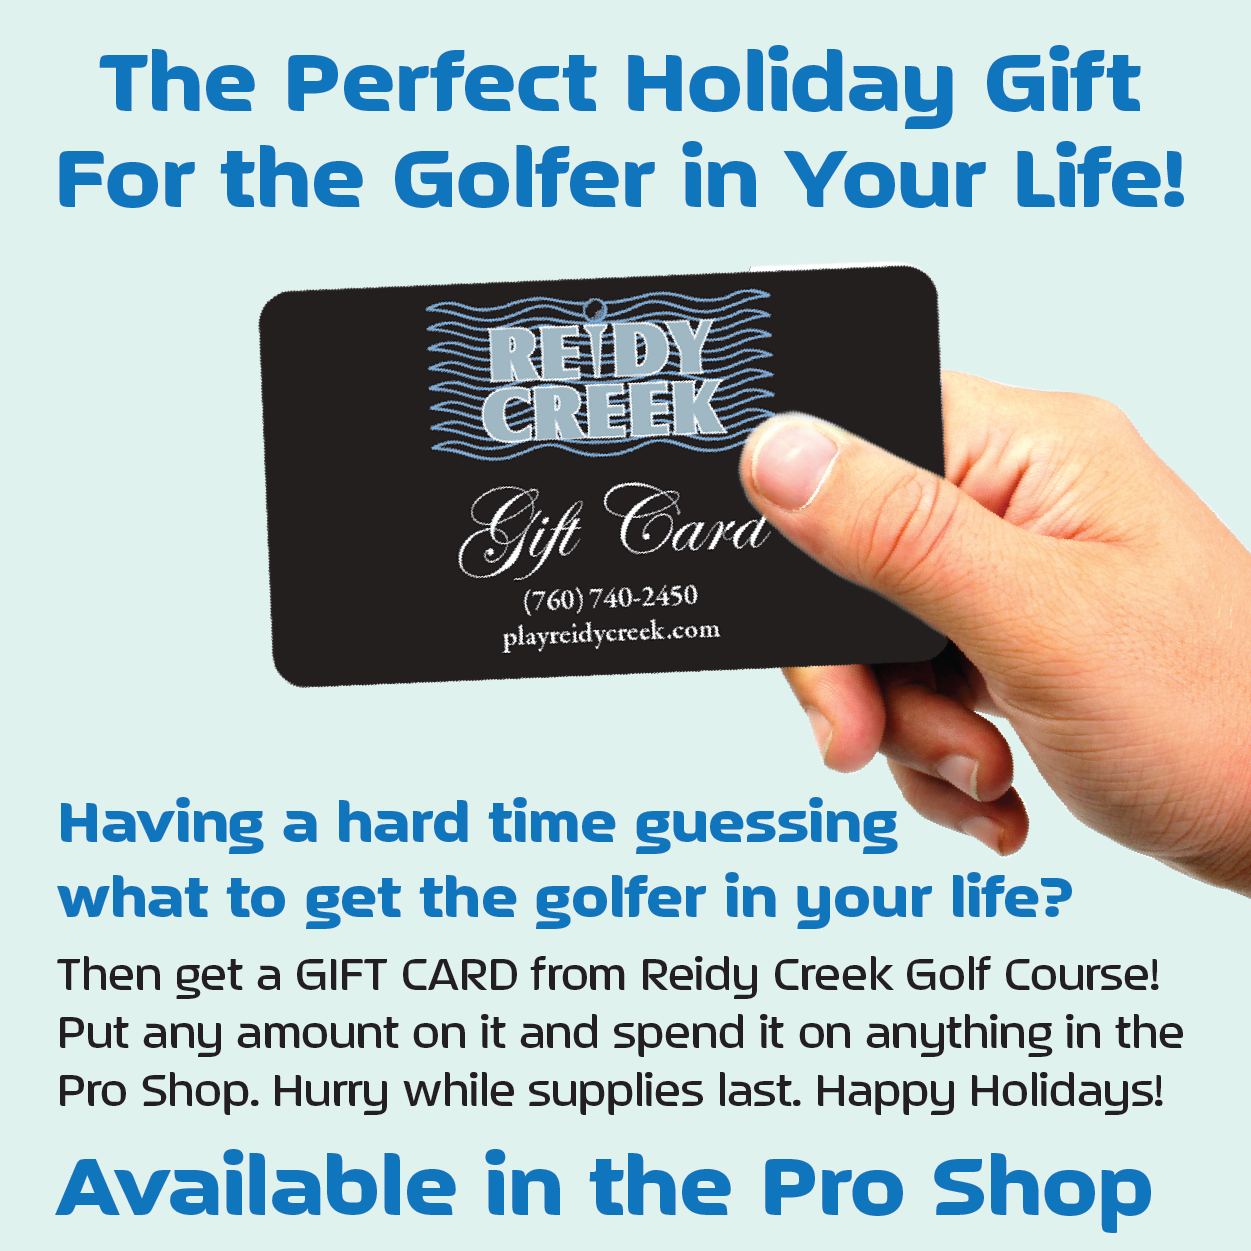 The perfect Holiday Gift for the Golfer in your life. Gift Cards available in the Pro Shop!